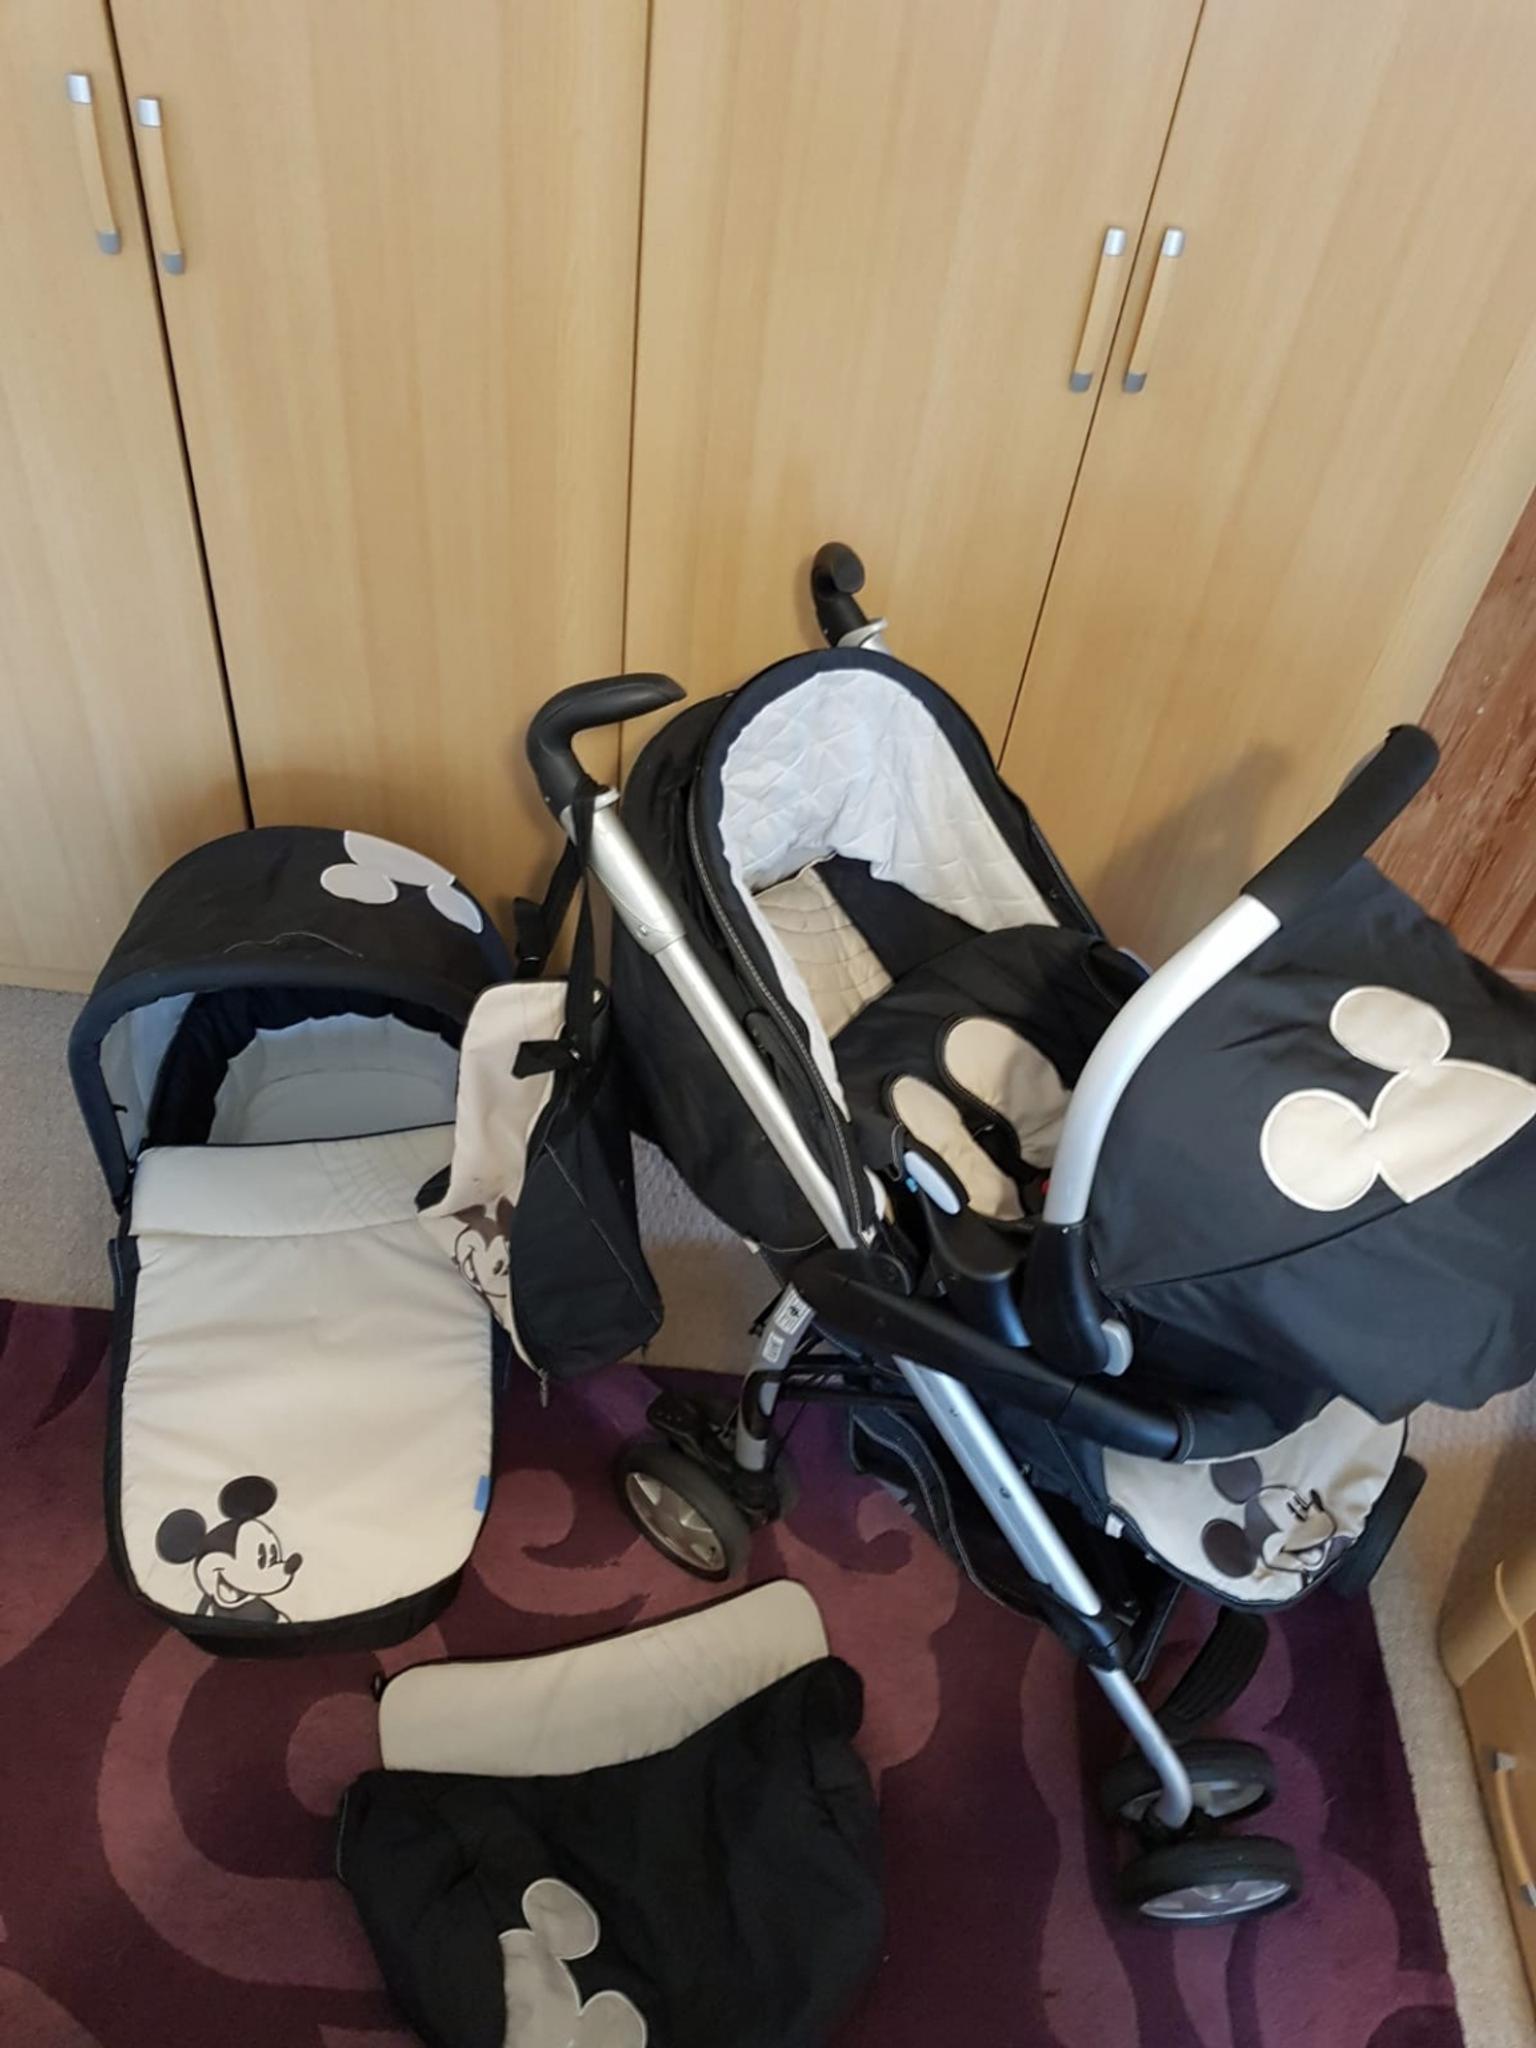 hauck condor travel system mickey mouse